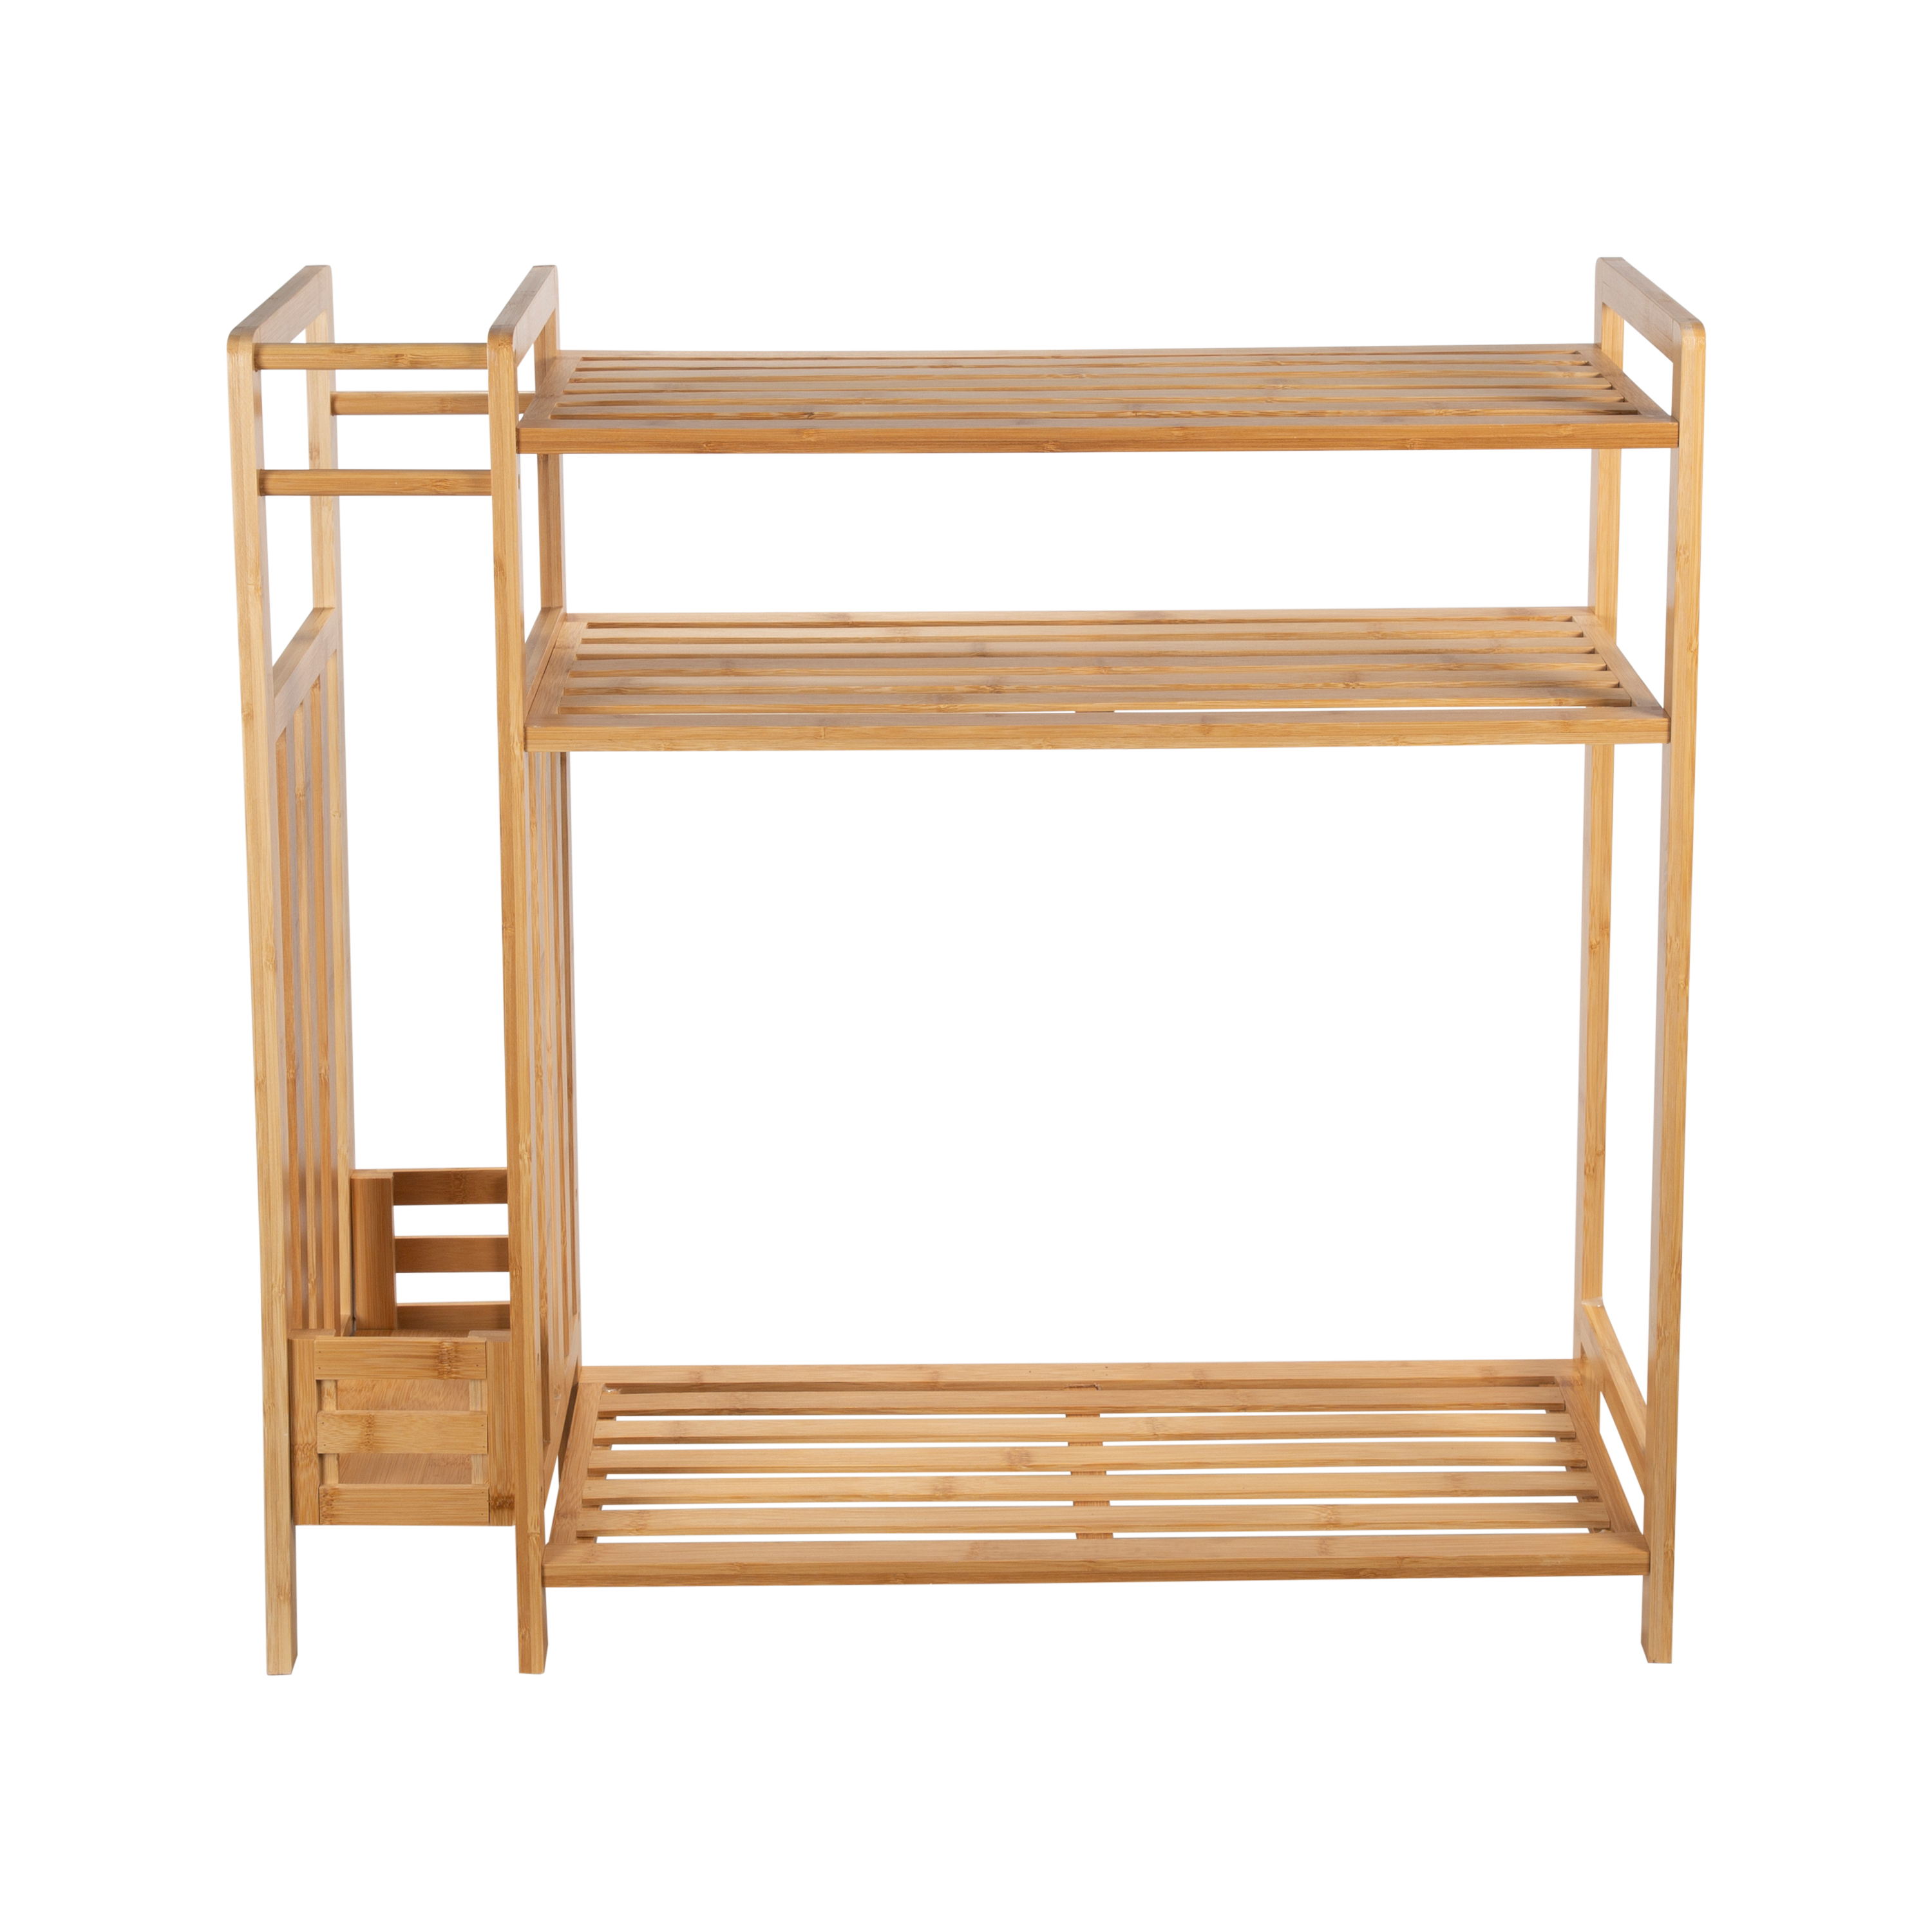 Organize It All Bamboo Shoe Rack with Umbrella Stand - image 4 of 10